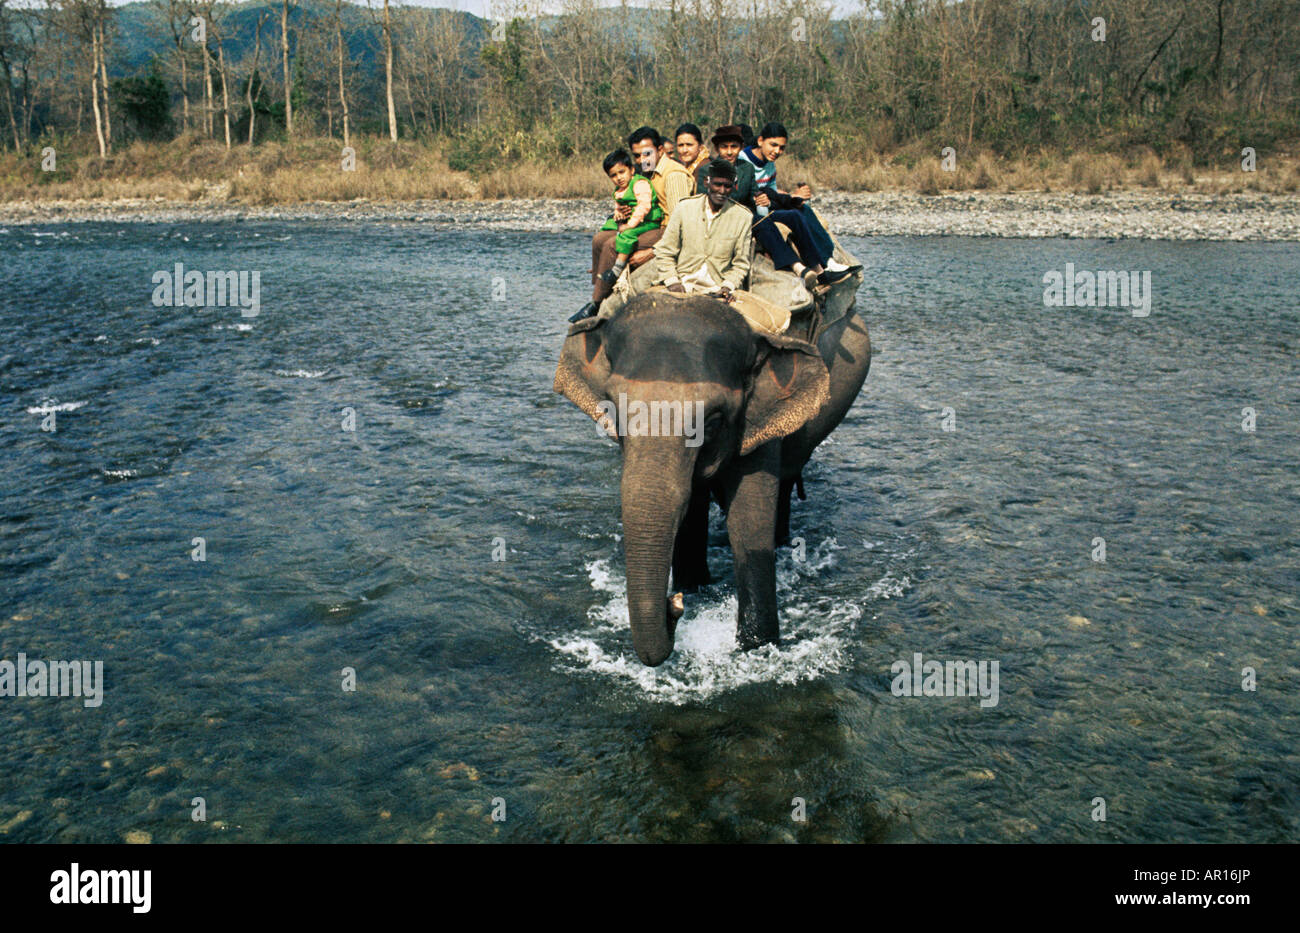 Elephant Safari at Corbett, Tigers are main attraction.It is open from15.11-15.6 due to floods. It has 70,000 visitors a yr. Stock Photo